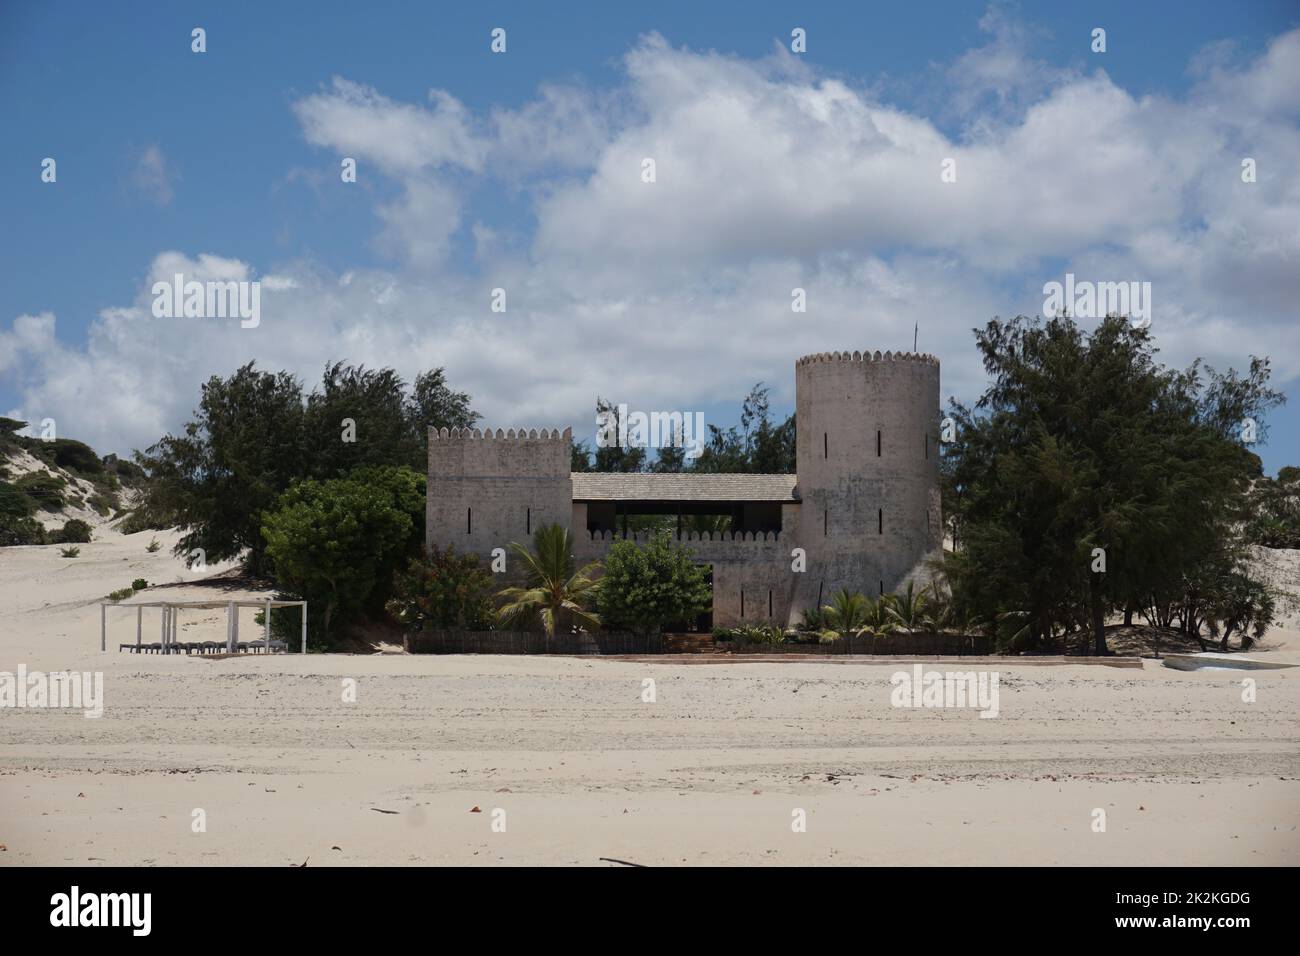 The Fort of Shela, picturesque scenery on Lamu Island Stock Photo